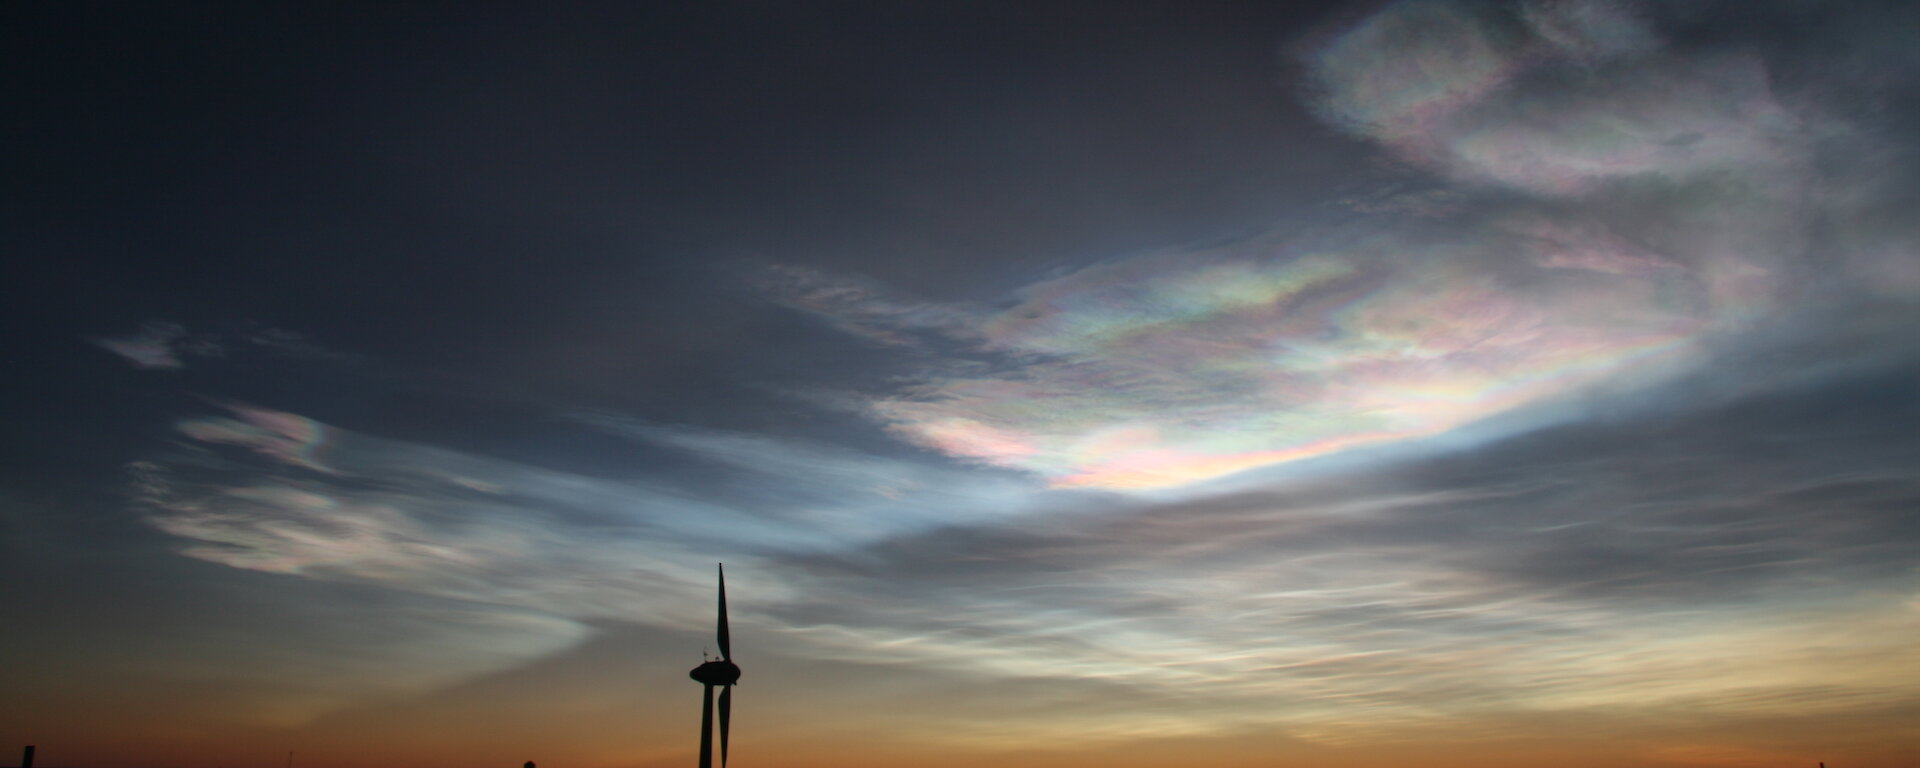 Nacreous clouds over Mawson station